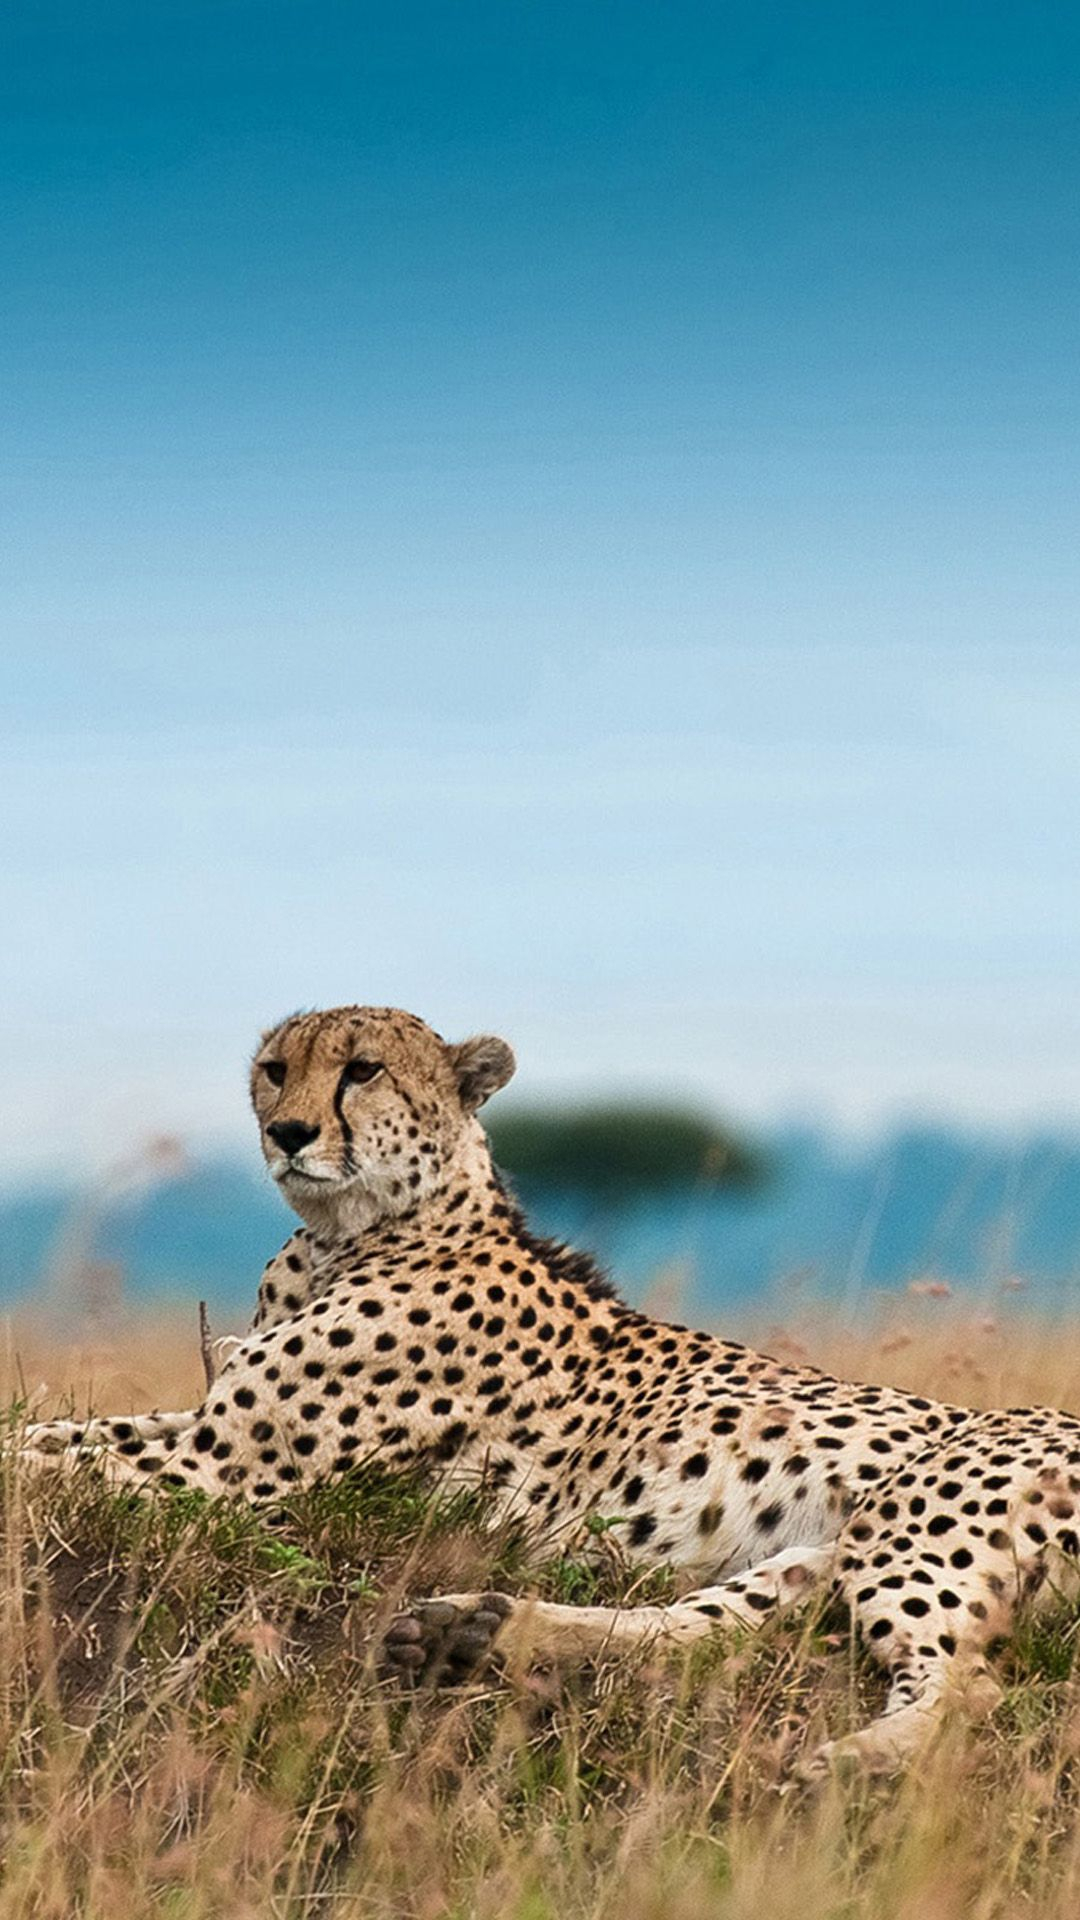 1080x1920 South Africa Leopard iPhone 6 Wallpaper Download | iPhone Wallpapers, iPad wallpapers One-stop Download | Cheetah wallpaper, Animal wallpaper, Cat wallpaper